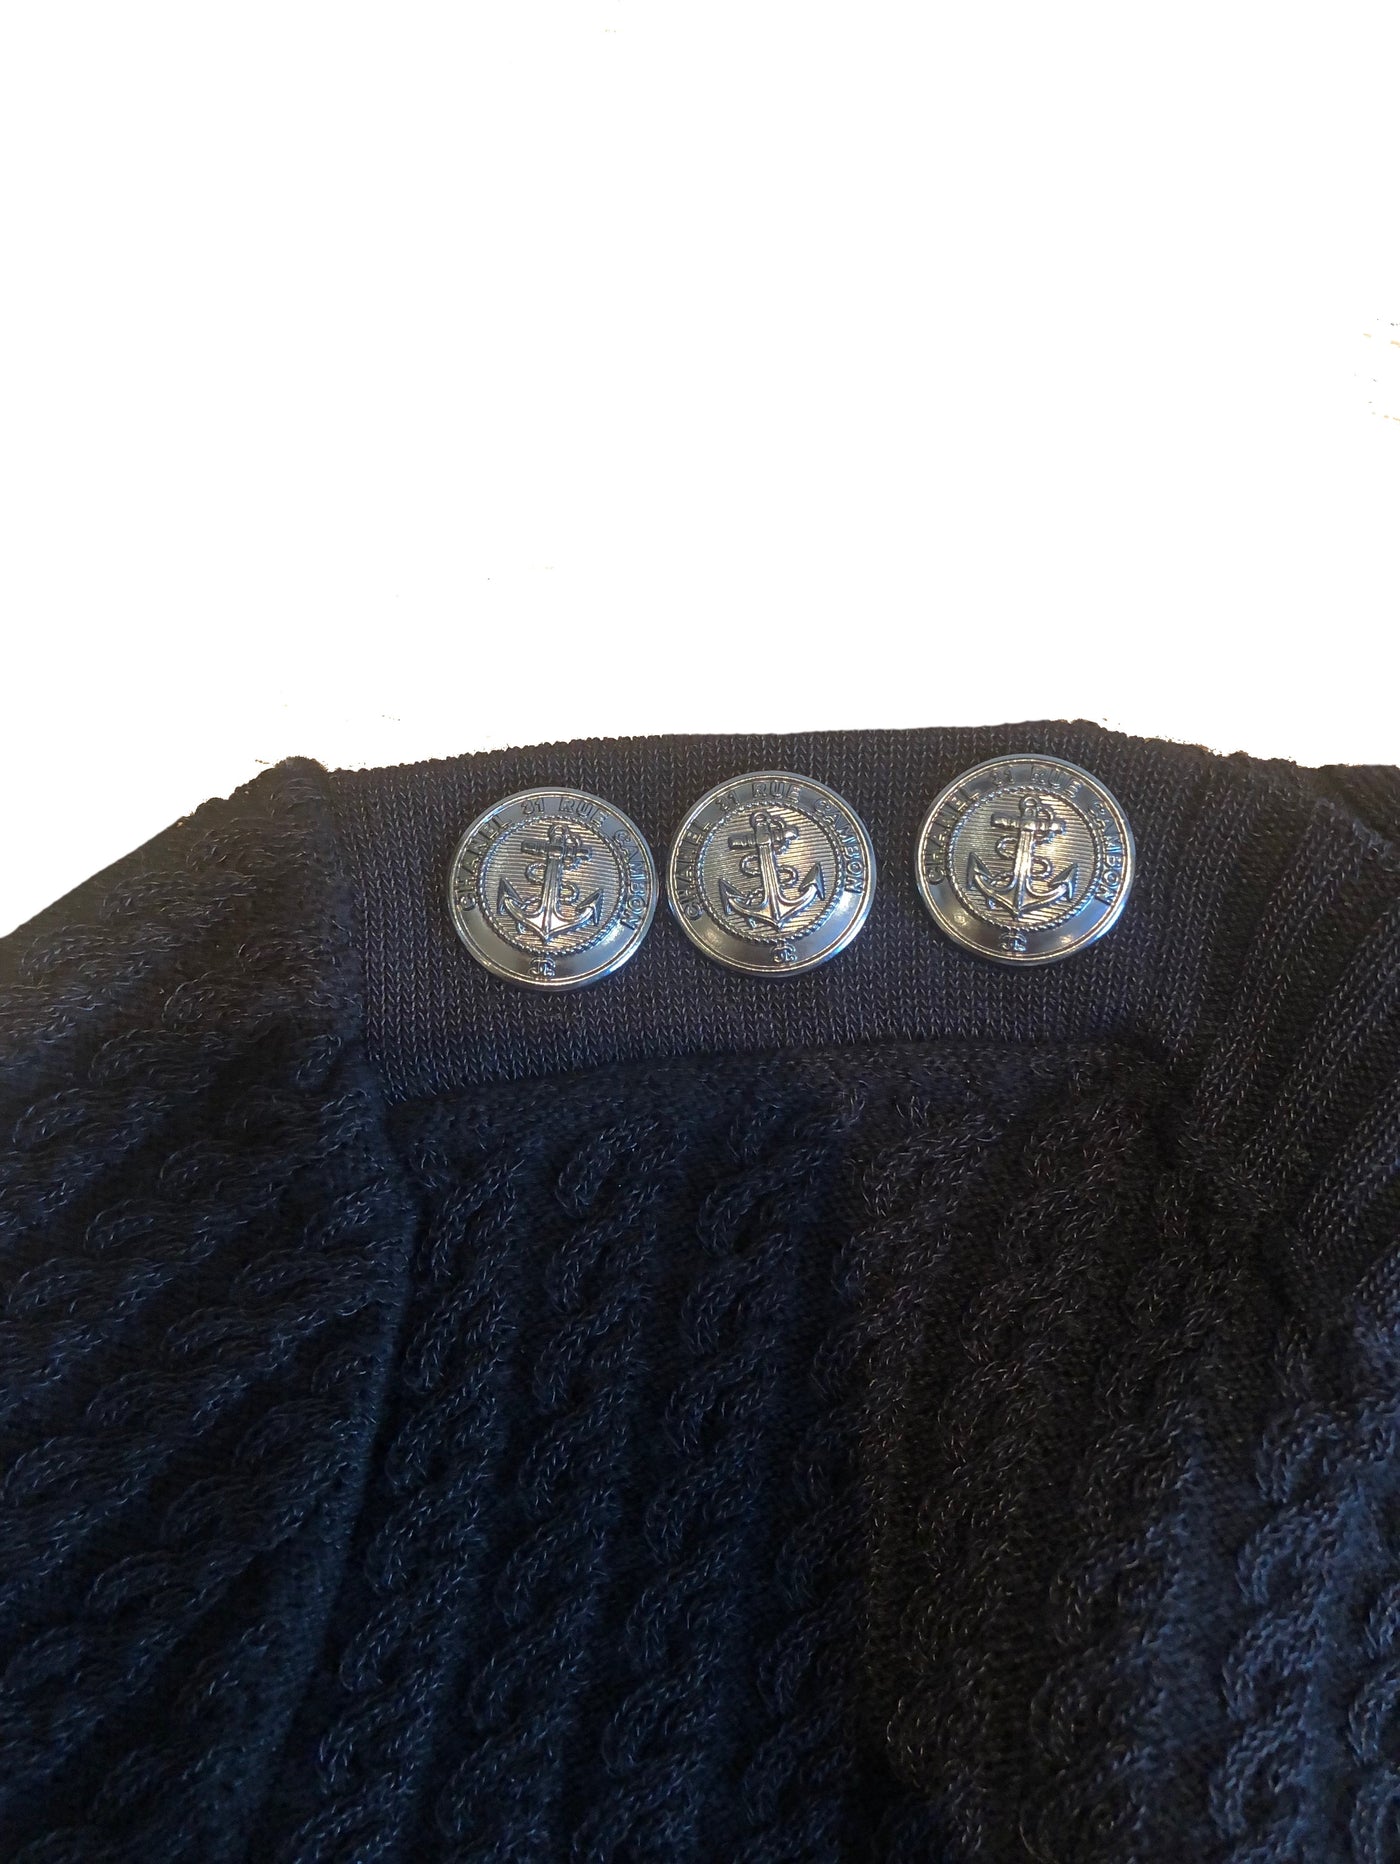 CHANEL black cable knit top with silver buttons size 36